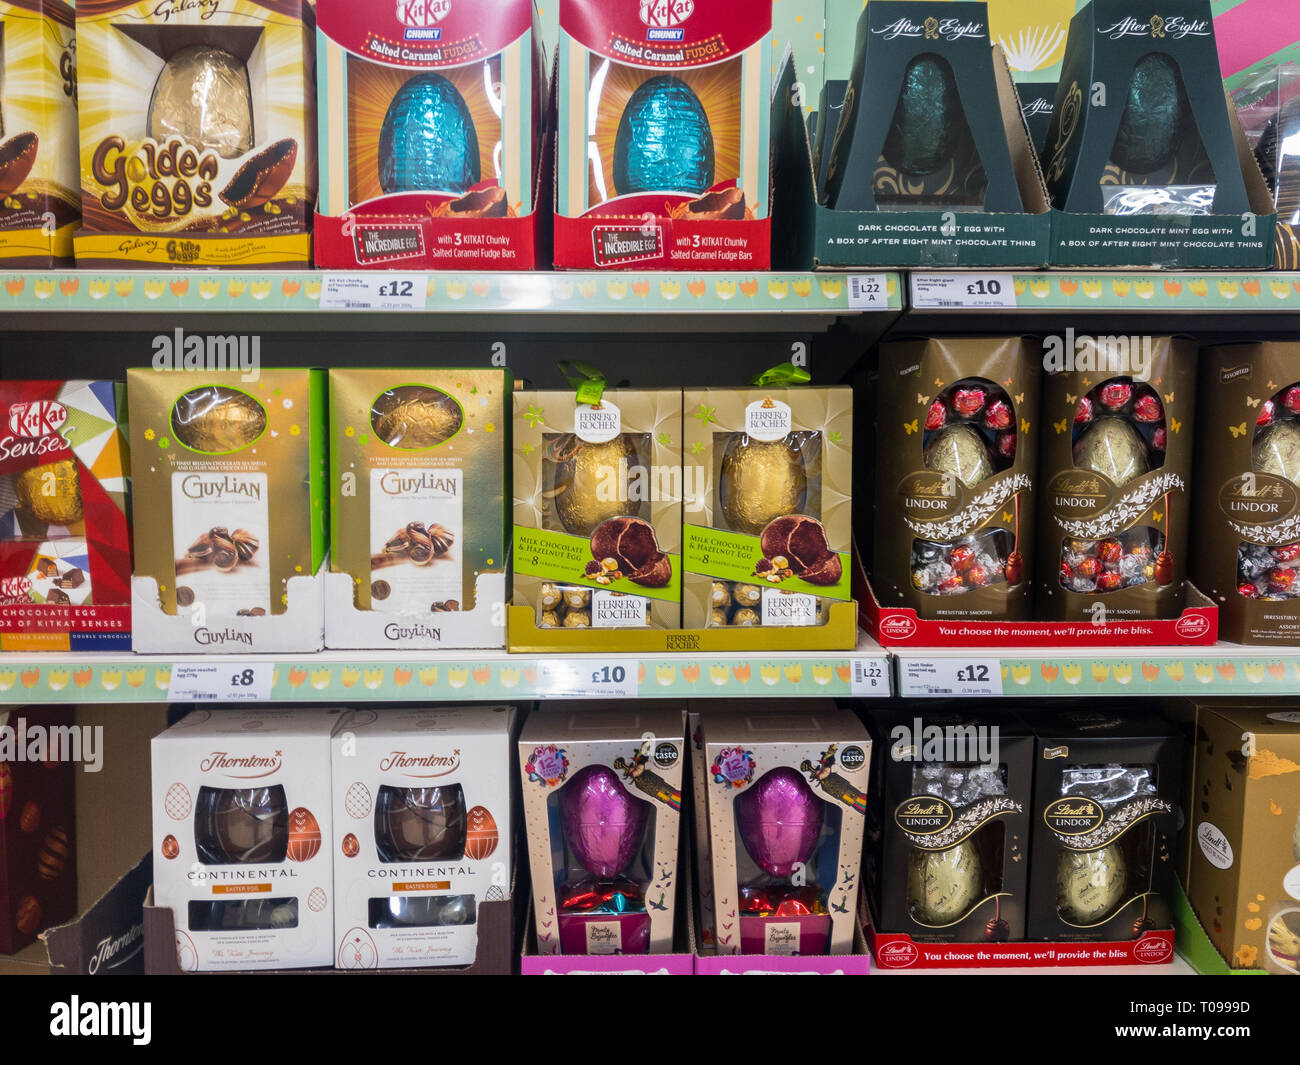 Exeter, Devon , England, March, 14, 2019: A UK supermarket filled shelves selling large and expensive chocolate Easter Eggs. Lots of purple and red in Stock Photo